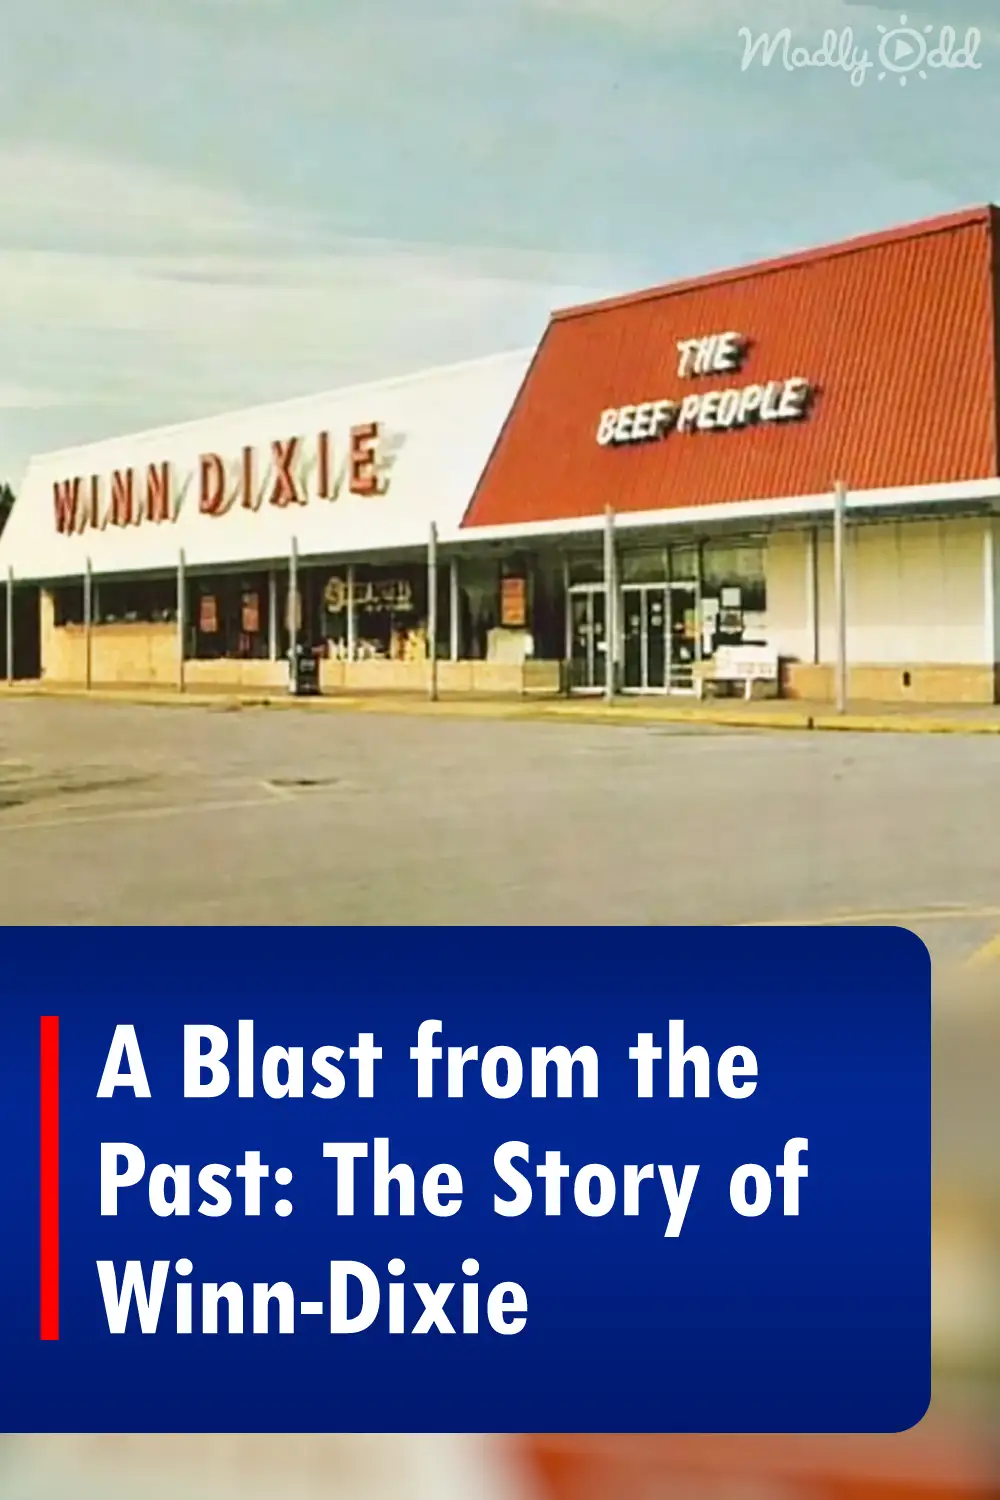 A Blast from the Past: The Story of Winn-Dixie